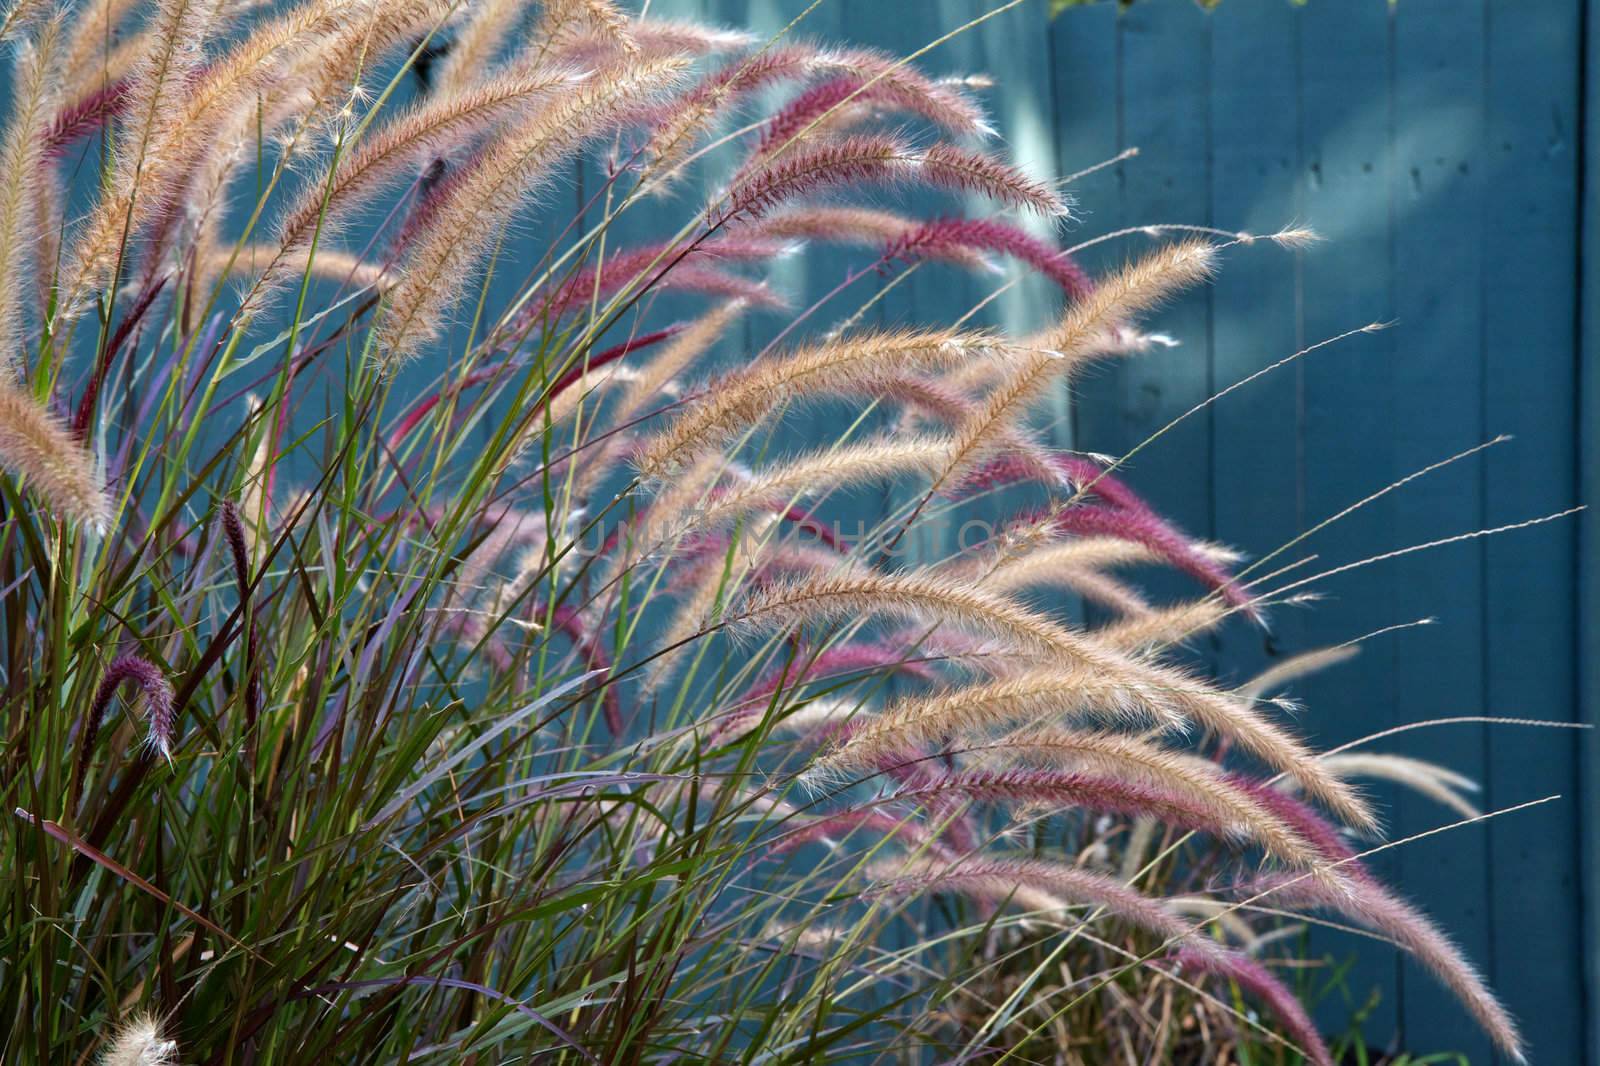 Beige and magenta swamp grass with a soft focus turquoise fence